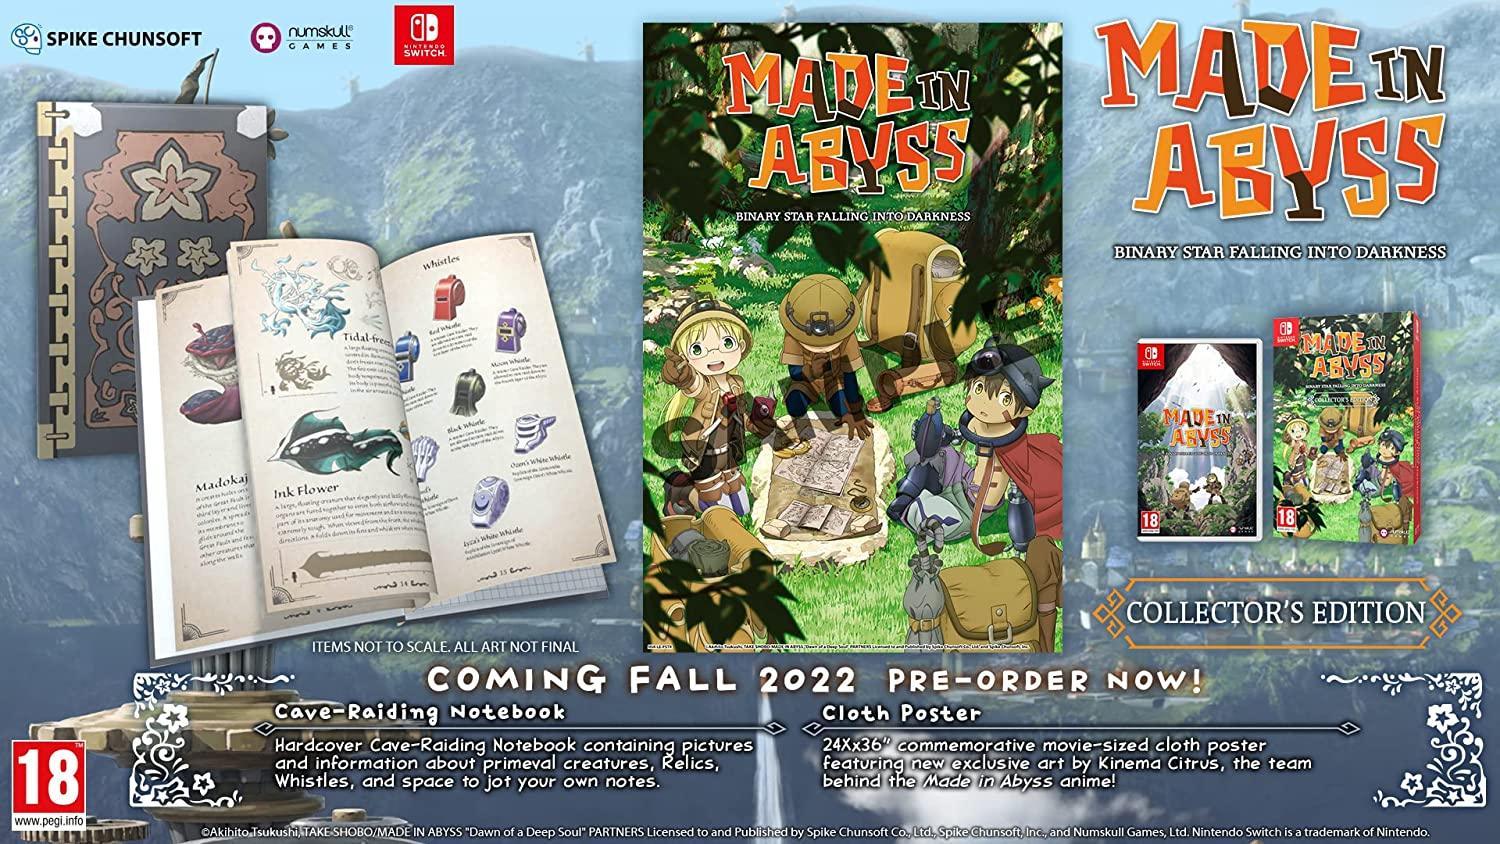 Made in Abyss [Collector's Edition] - Nintendo Switch - GD Games 